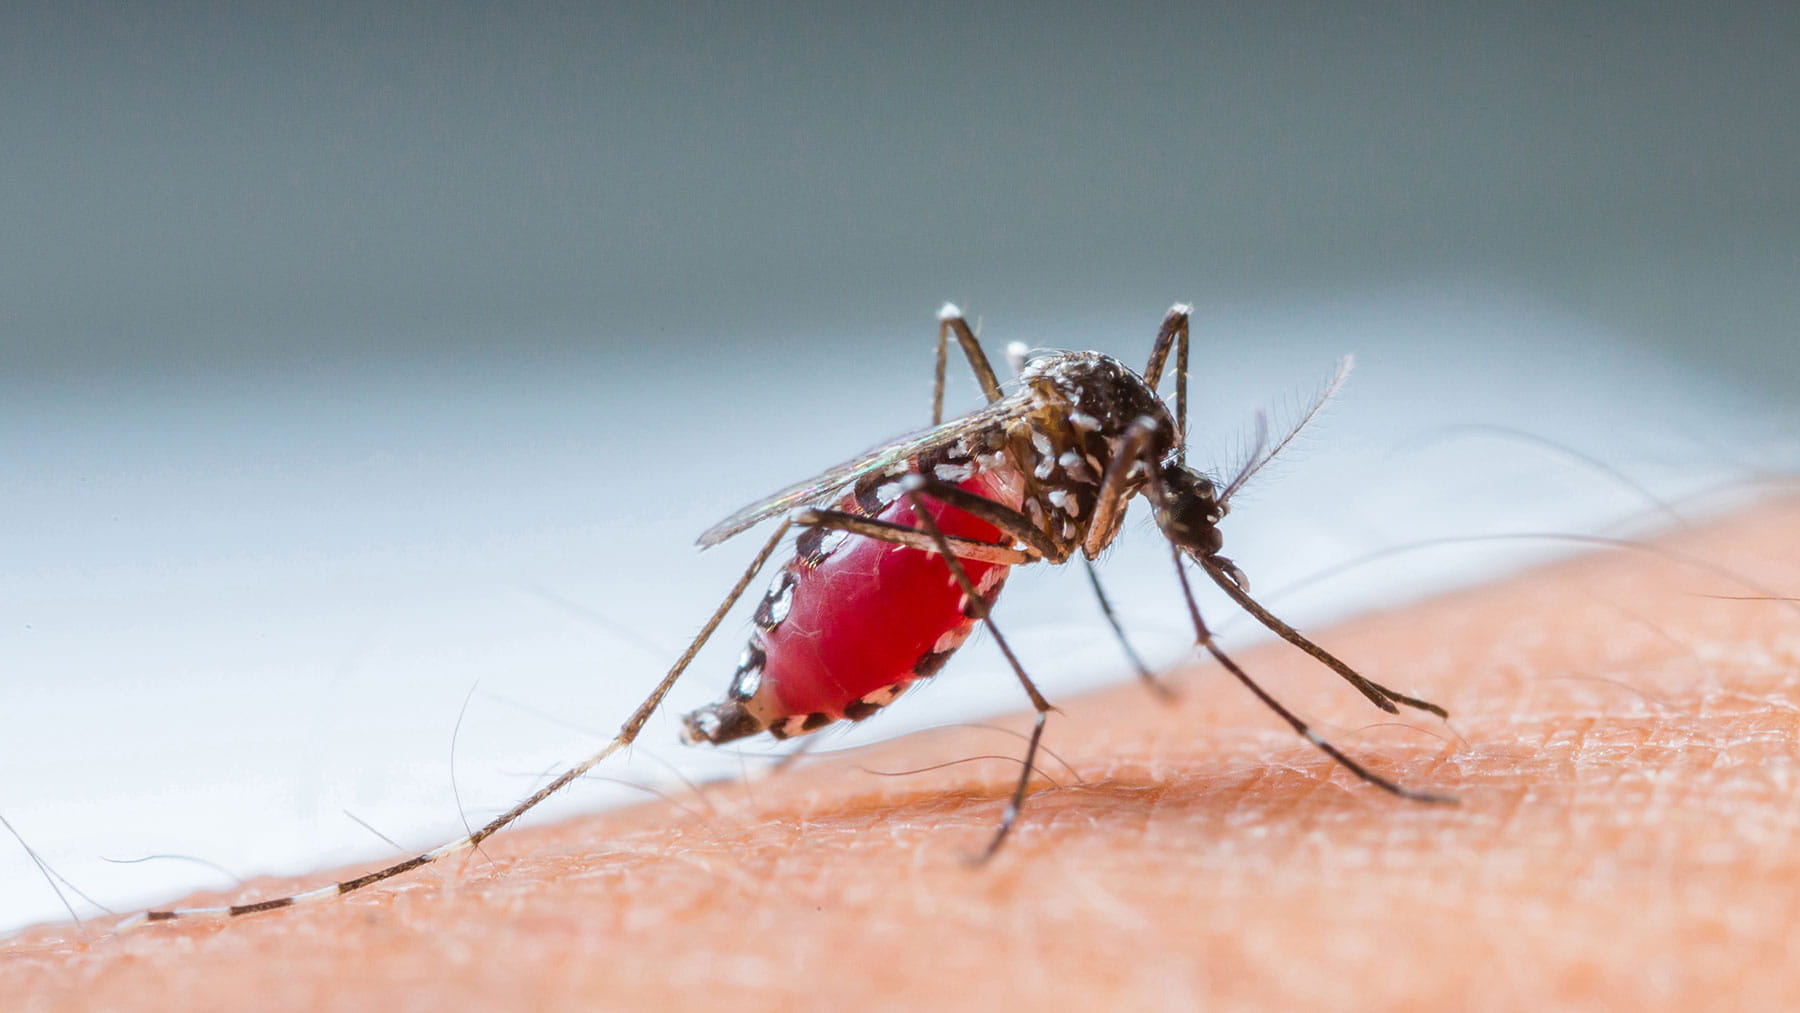 Is that mosquito bite cause for concern? | Ohio State ...